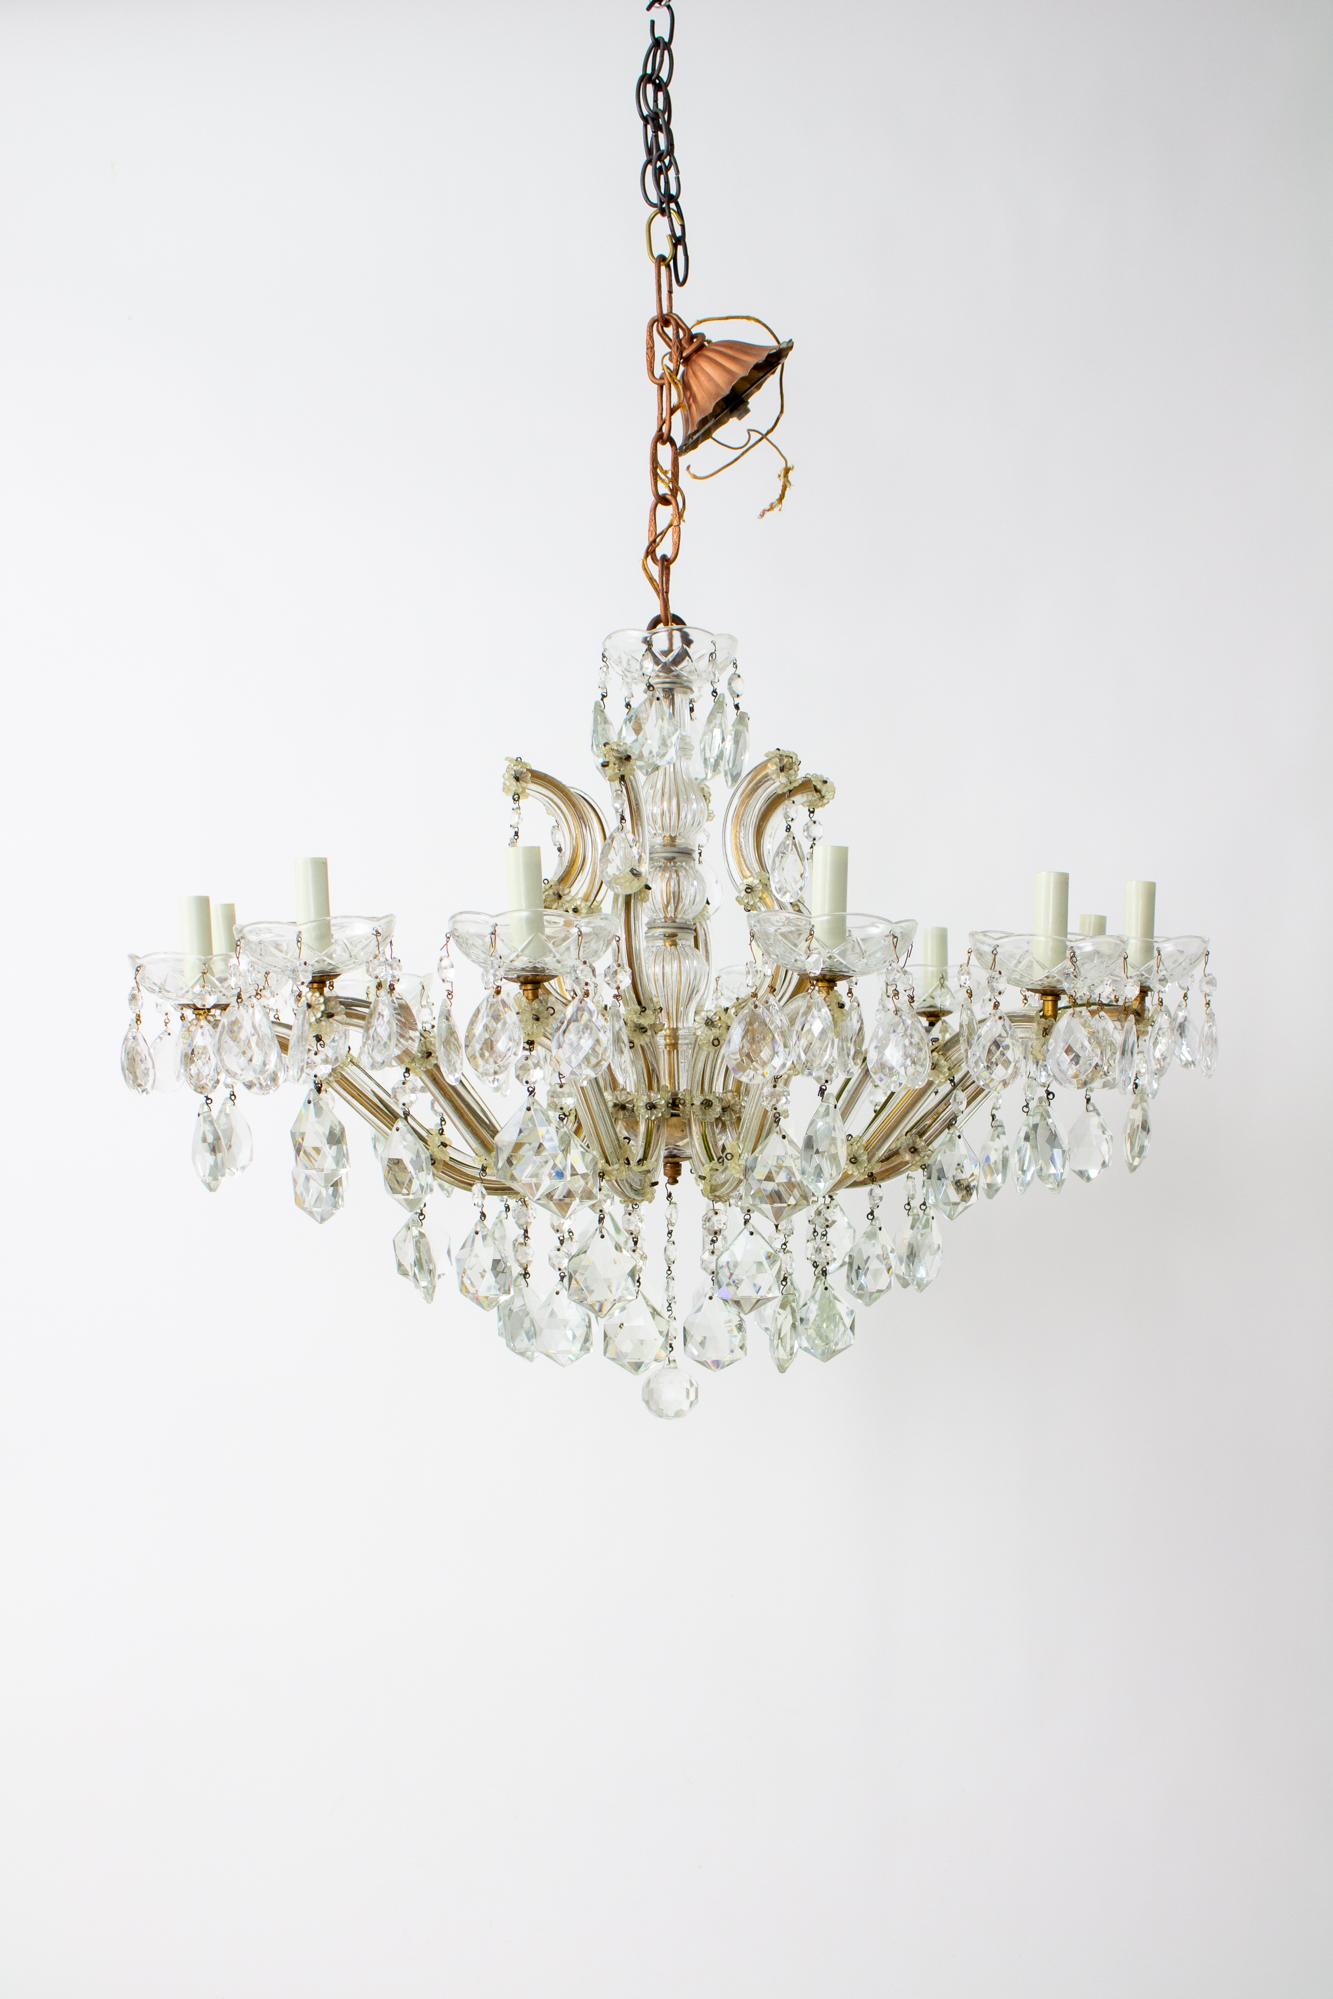 Mid 20th Century Crystal Maria Theresa Chandelier In Good Condition For Sale In Canton, MA